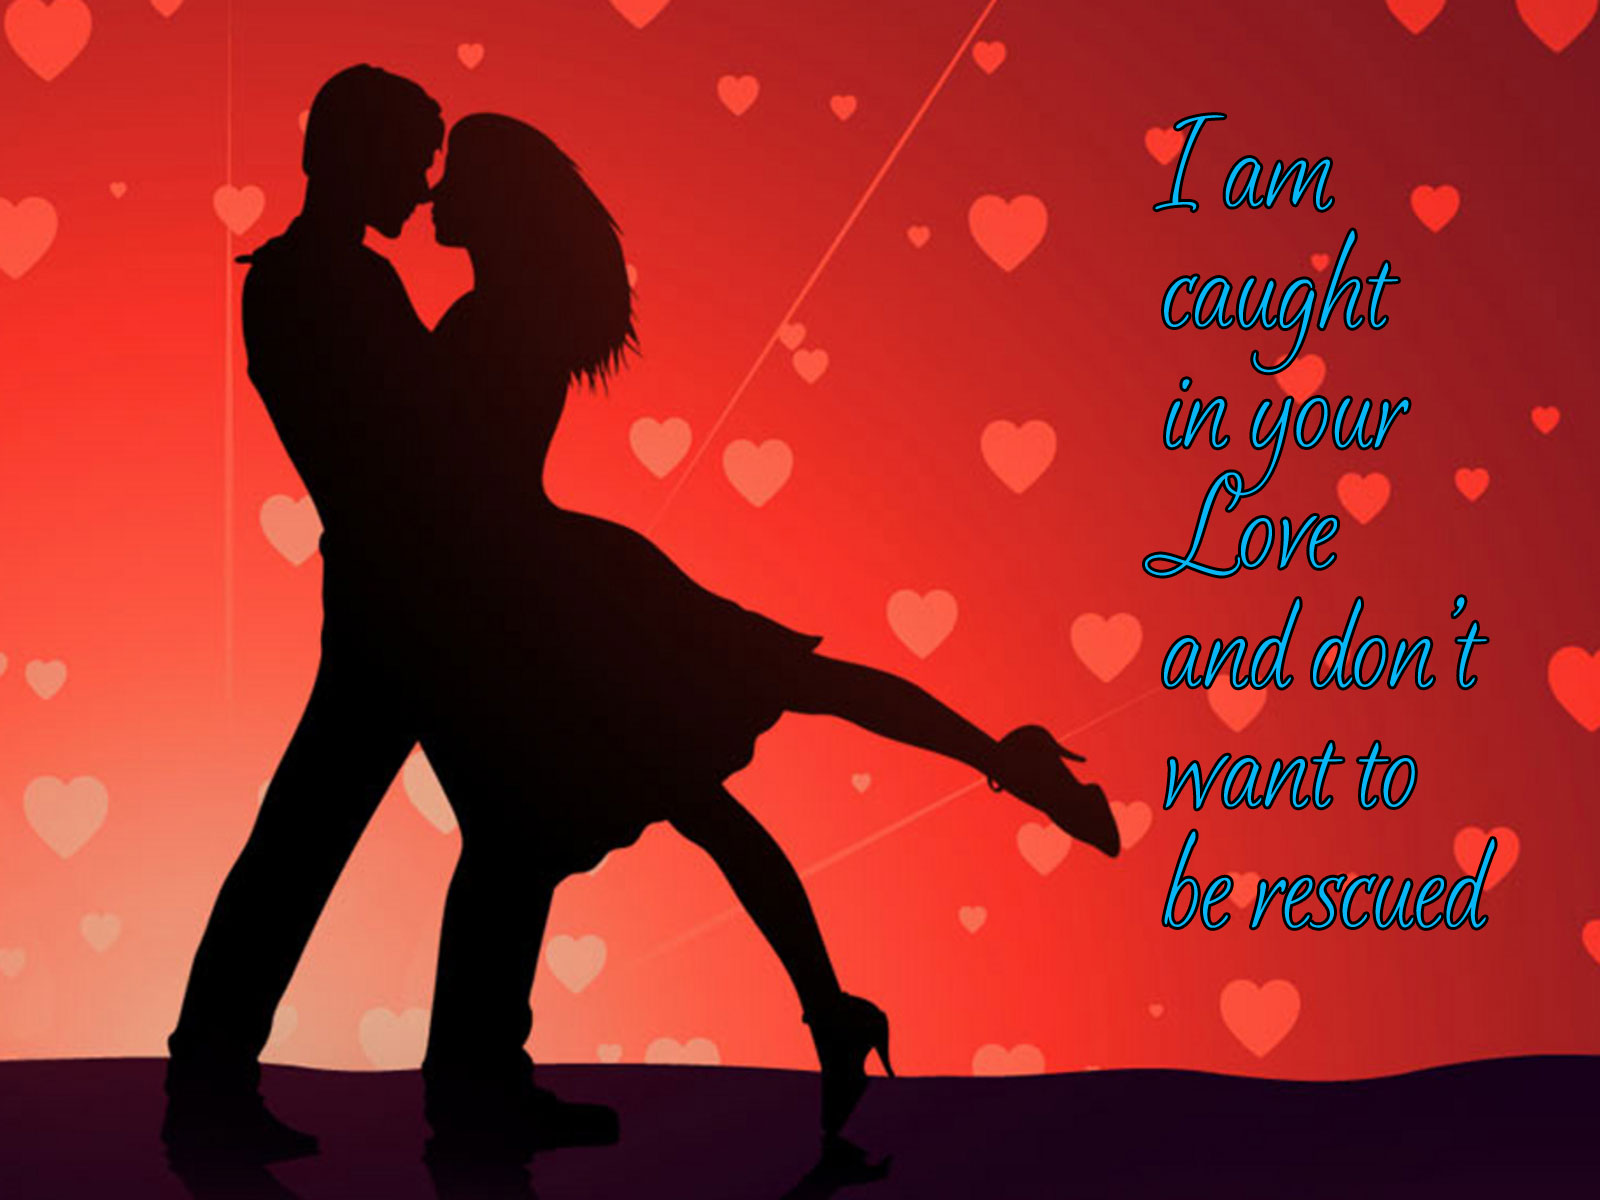 New Love Wallpapers With Quotes - HD Wallpaper 